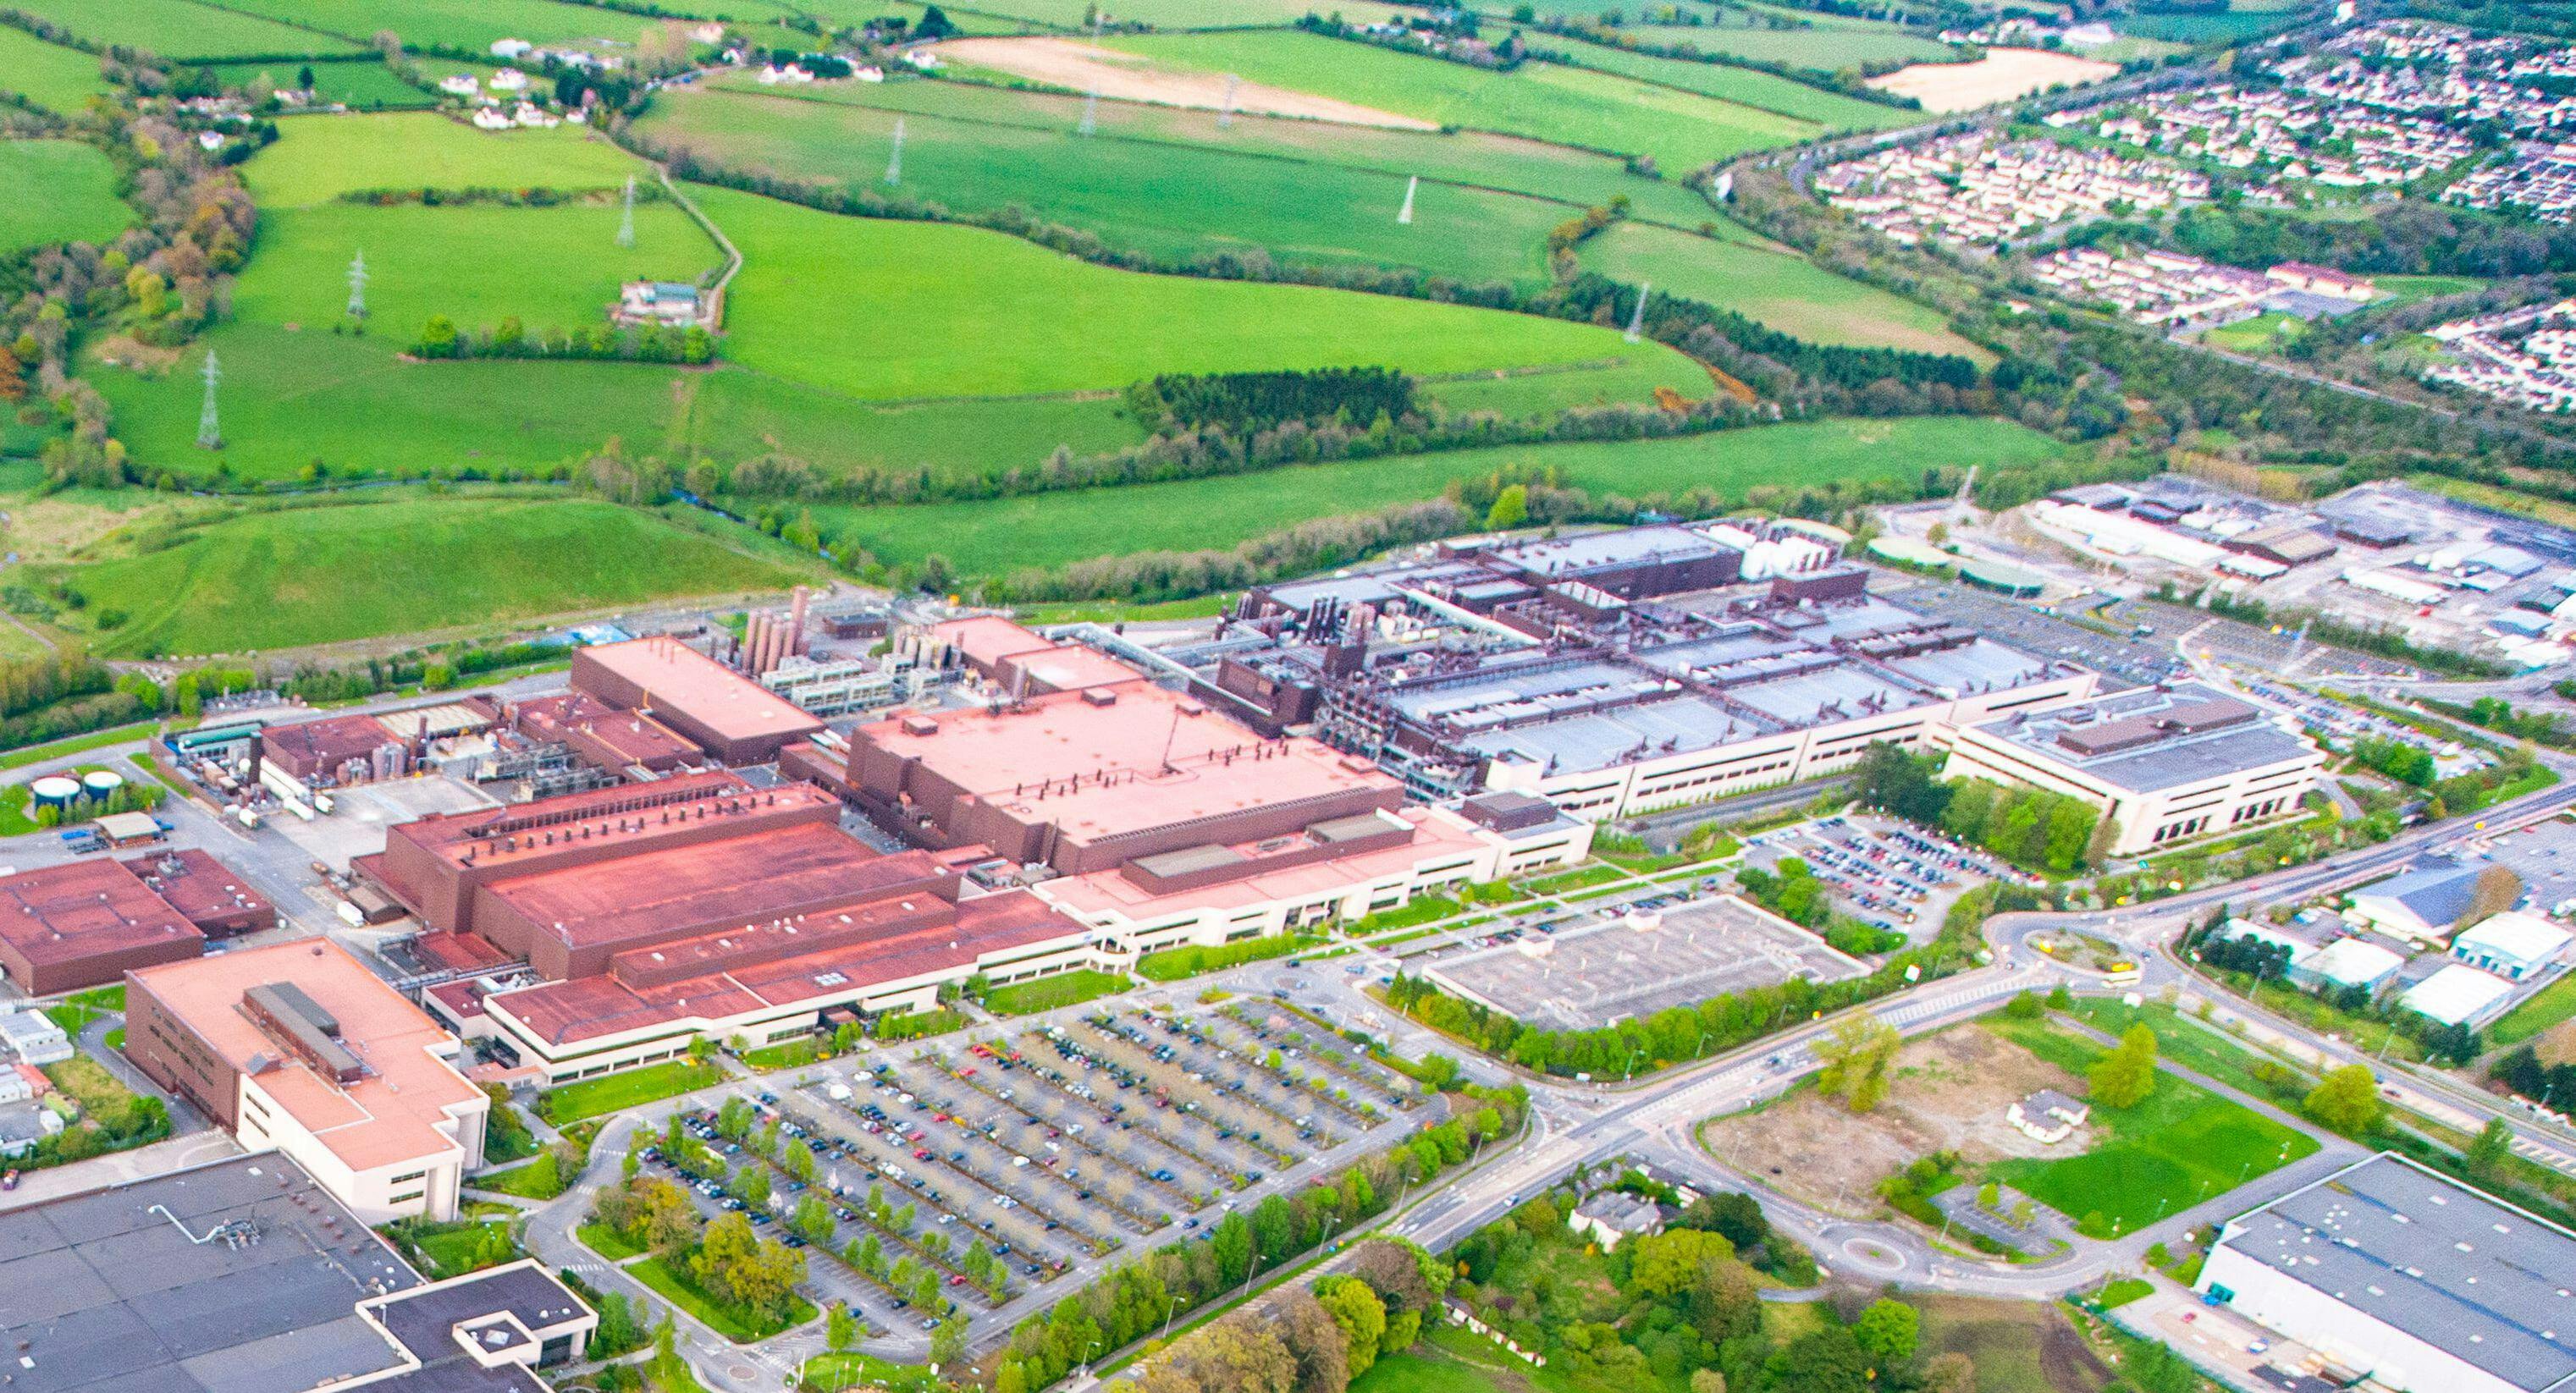 An arial view of a generic manufacturing facility, surrounded by countryside and housing developments